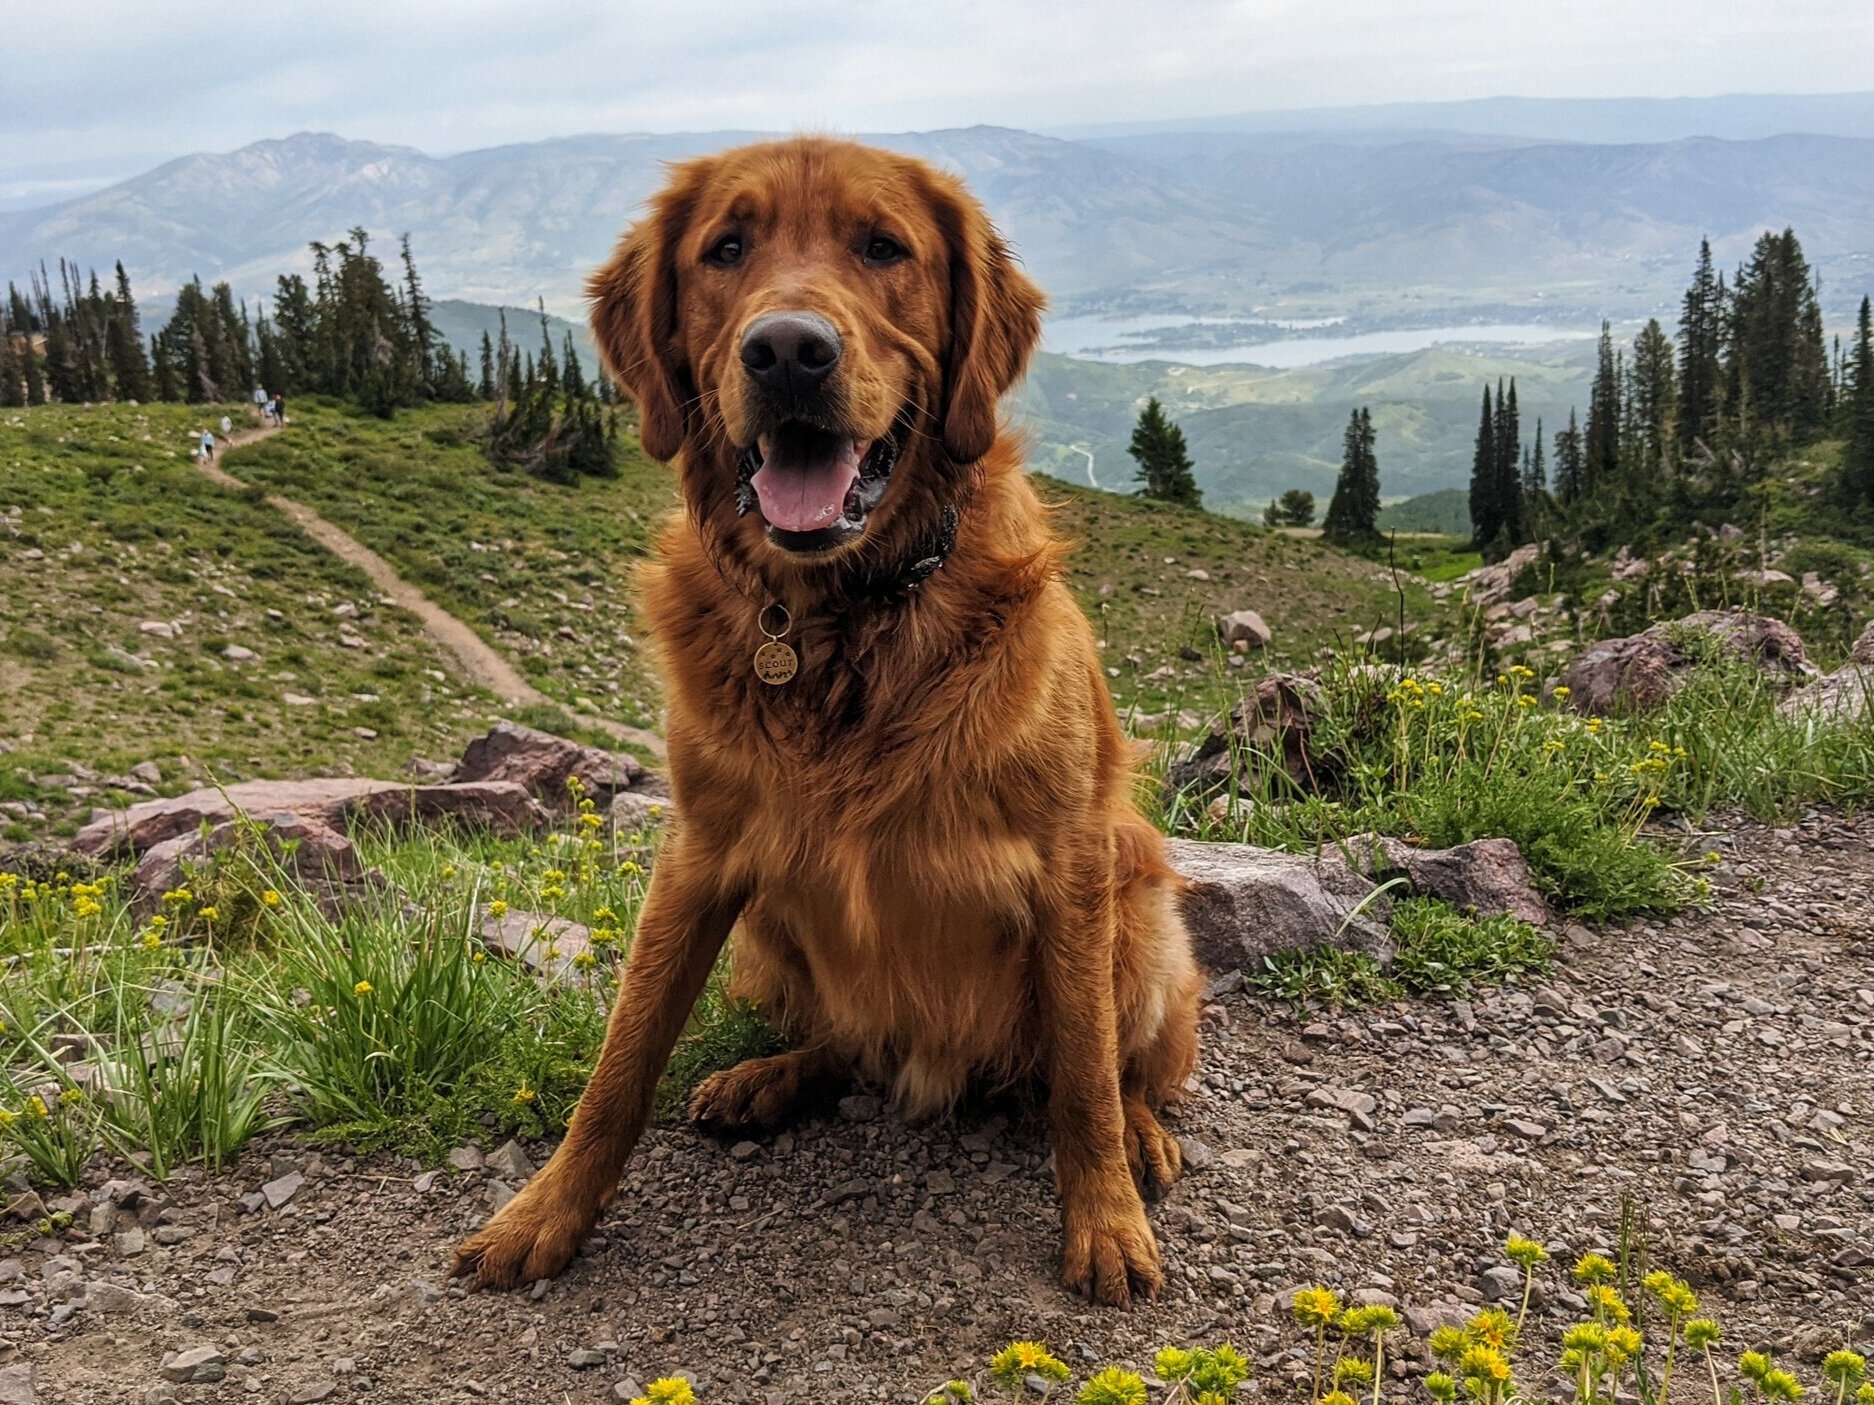 Scout sits on a rocky mountain slope during spring with the Pineview Reservoir sitting far below